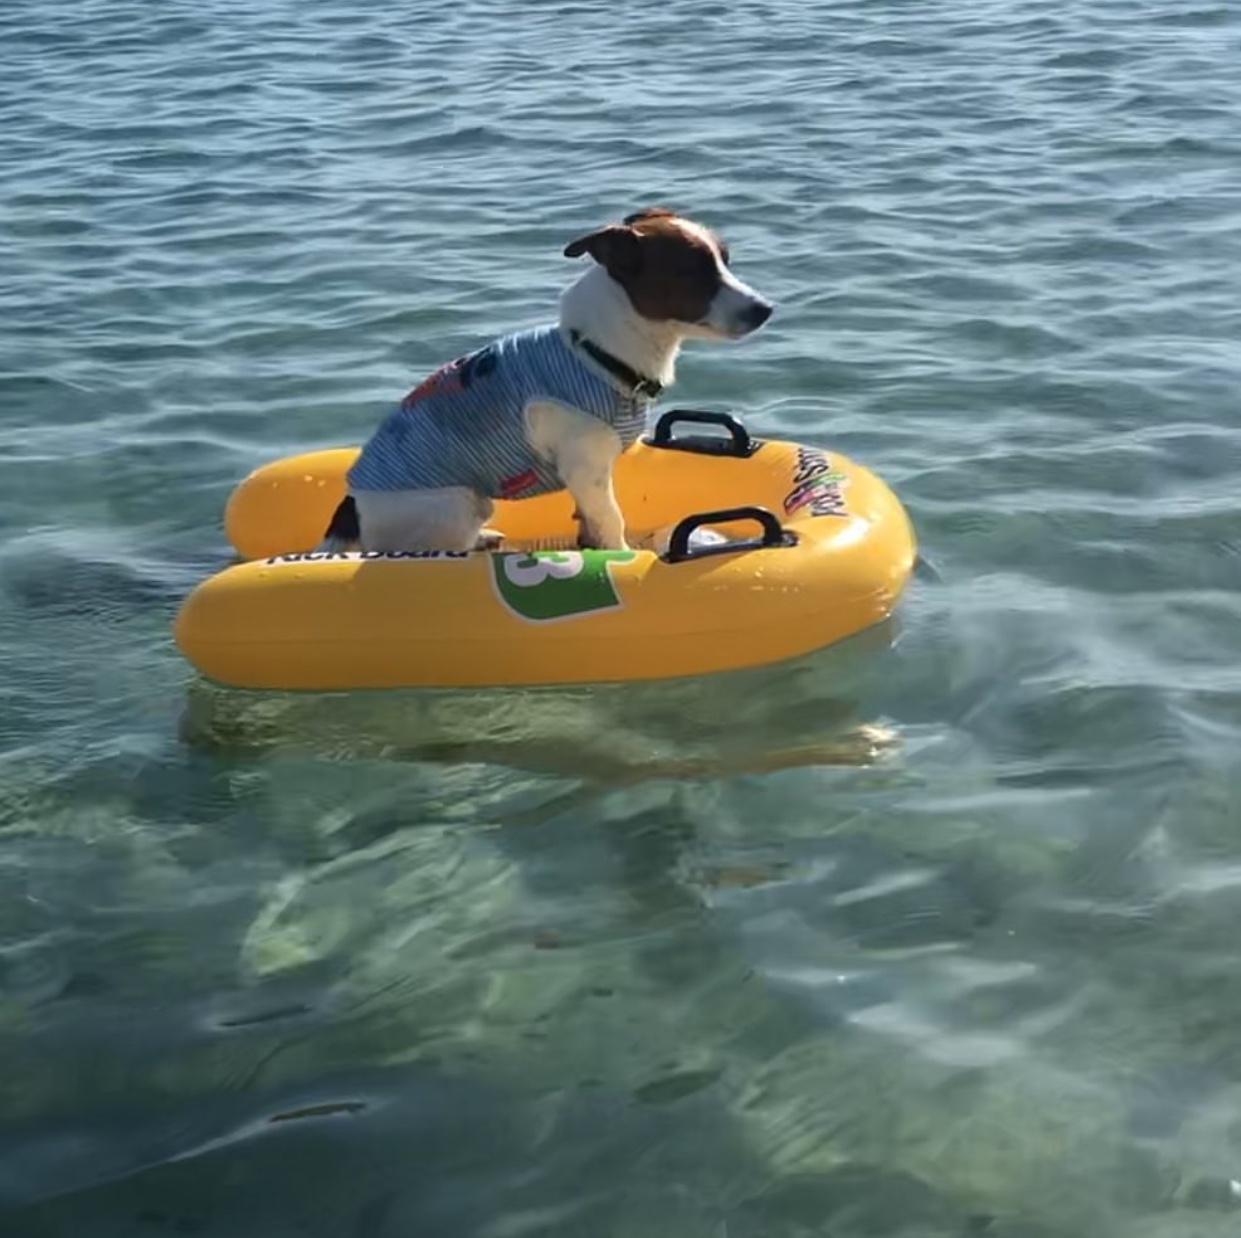 Jack Russell Terrier sitting on the floaty while floating in the ocean